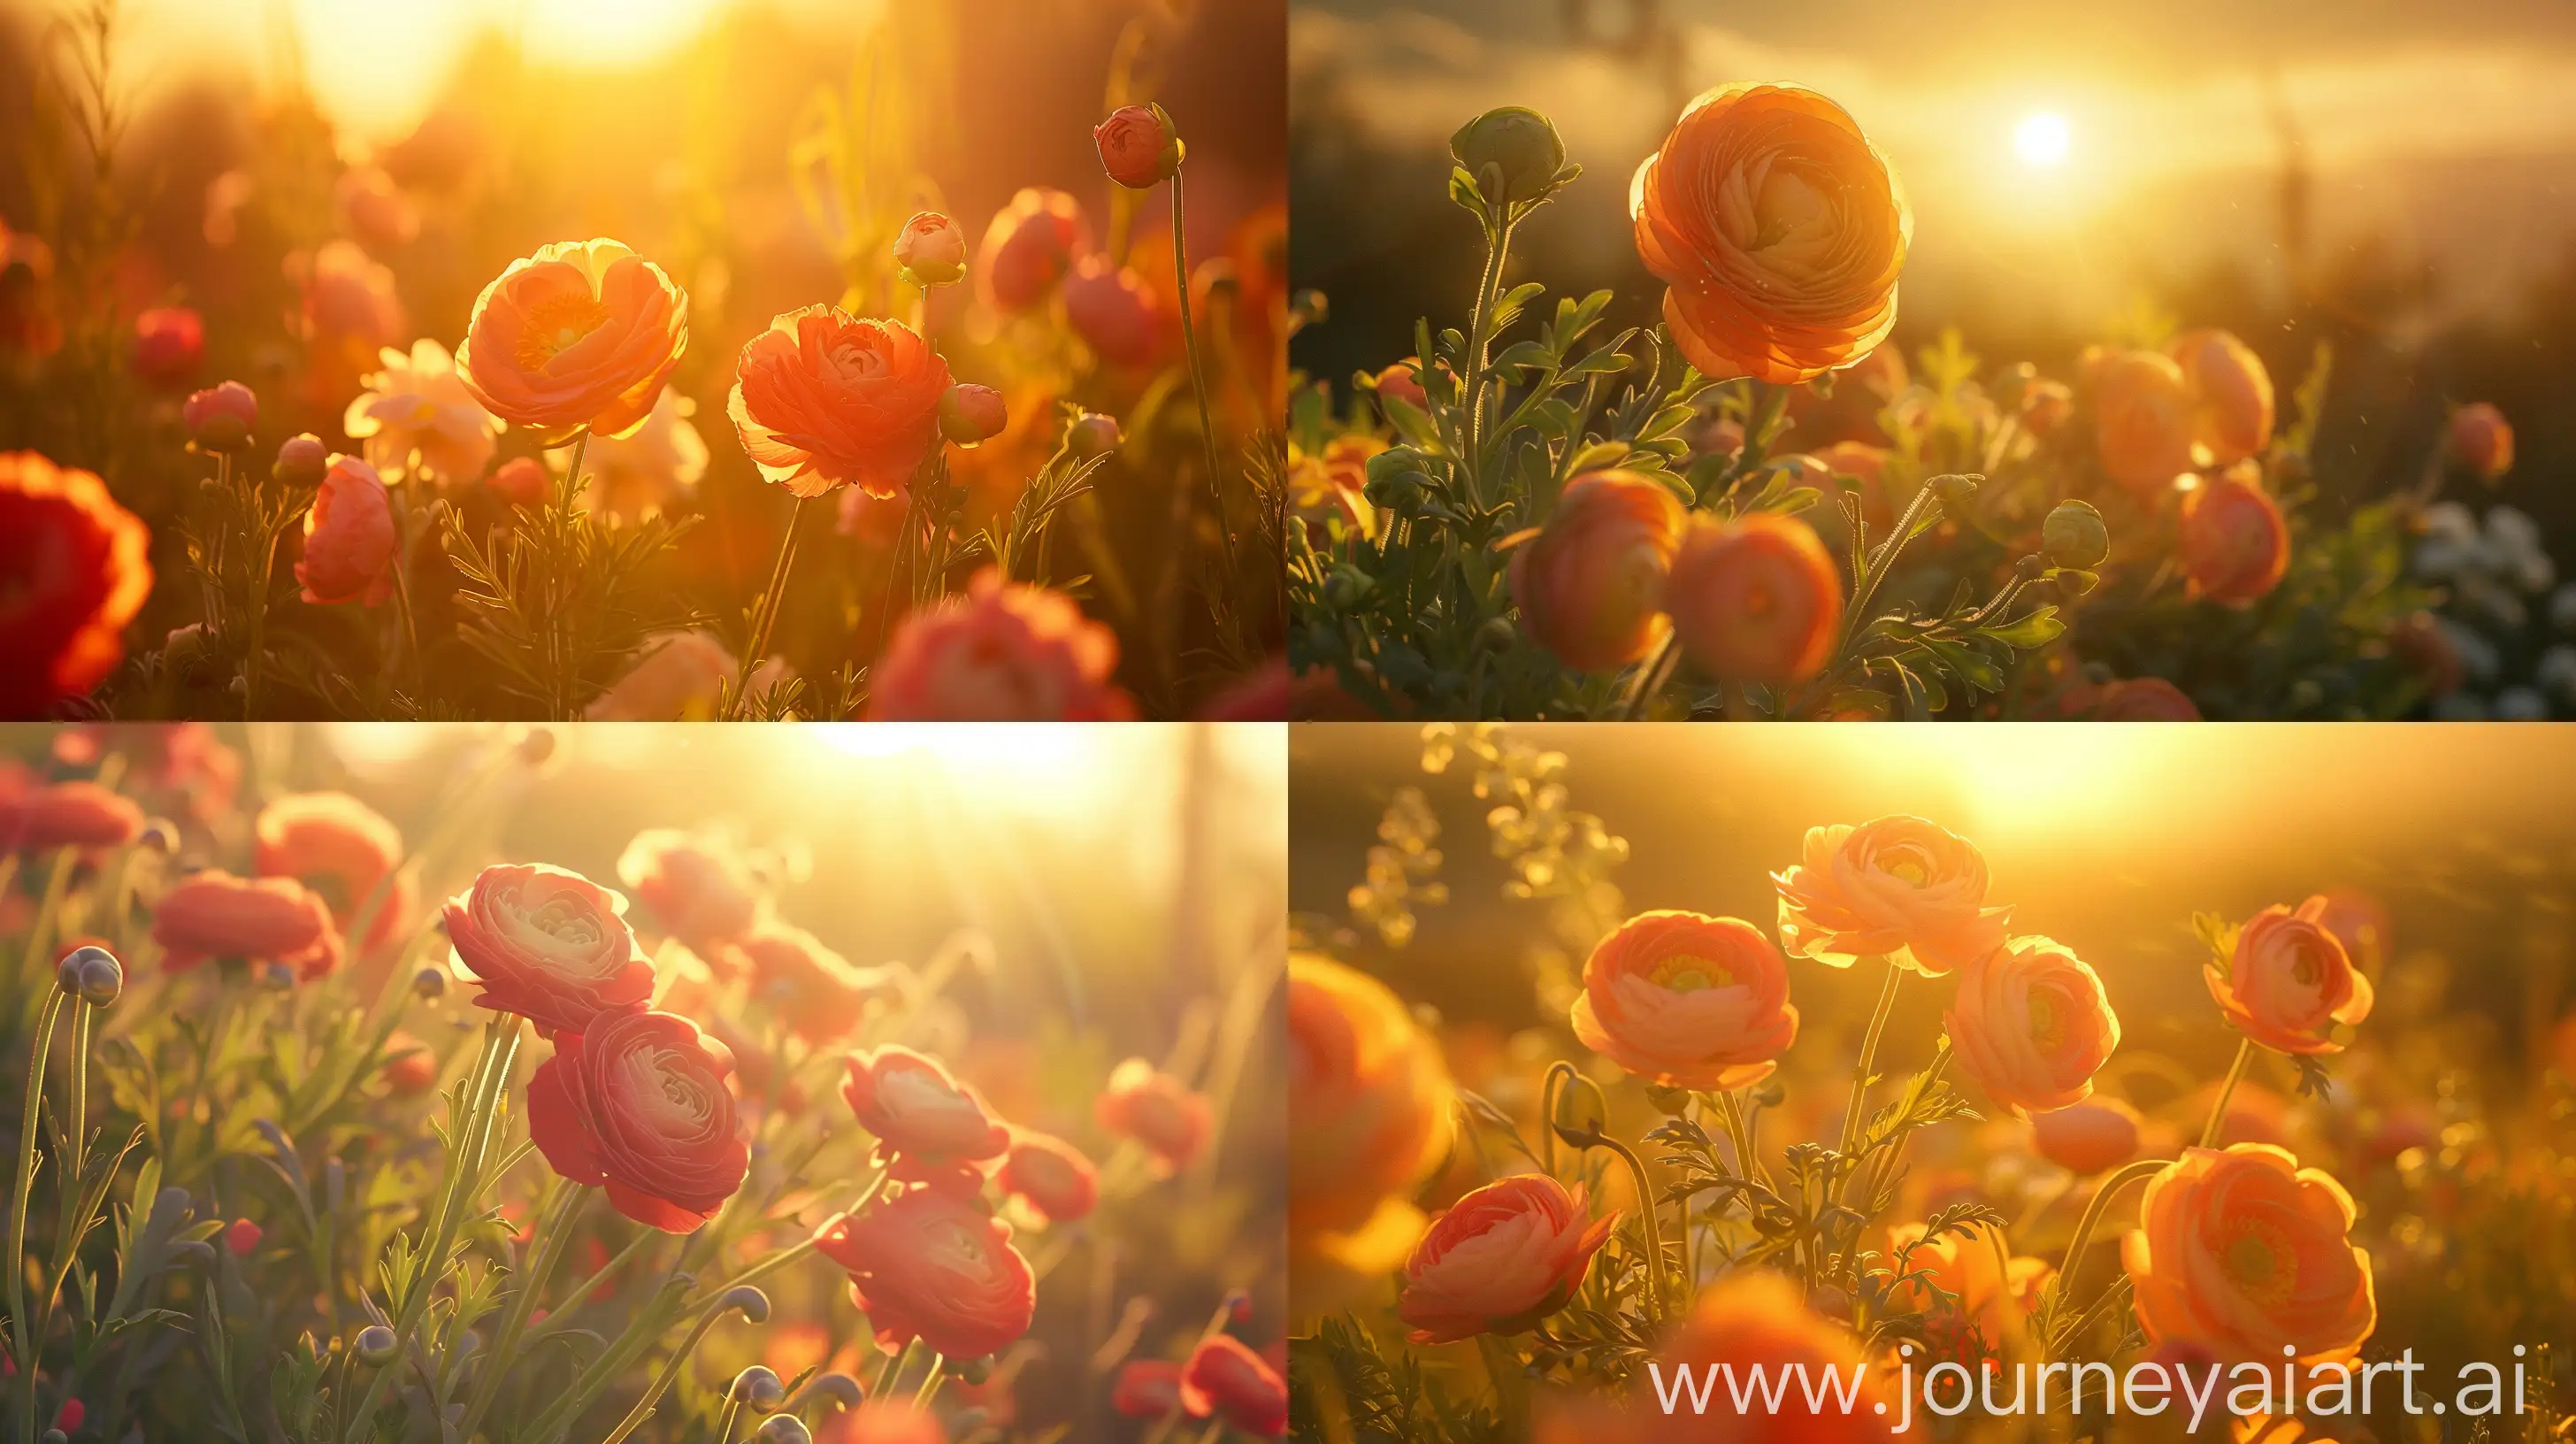 High detailed photo capturing a Ranunculus asiaticus Mix. The sun, casting a warm, golden glow, bathes the scene in a serene ambiance, illuminating the intricate details of each element. The composition centers on a Ranunculus asiaticus Mix. Known as Persian Buttercups, Ranunculus asiaticus is a tuberous-rooted plant native to southeastern Europe and Asia Minor. Plants have fine-cut foliage and produce vibrant flowers with fine papery petals that resemble poppies.. The image evokes a sense of tranquility and natural beauty, inviting viewers to immerse themselves in the splendor of the landscape. --ar 16:9 